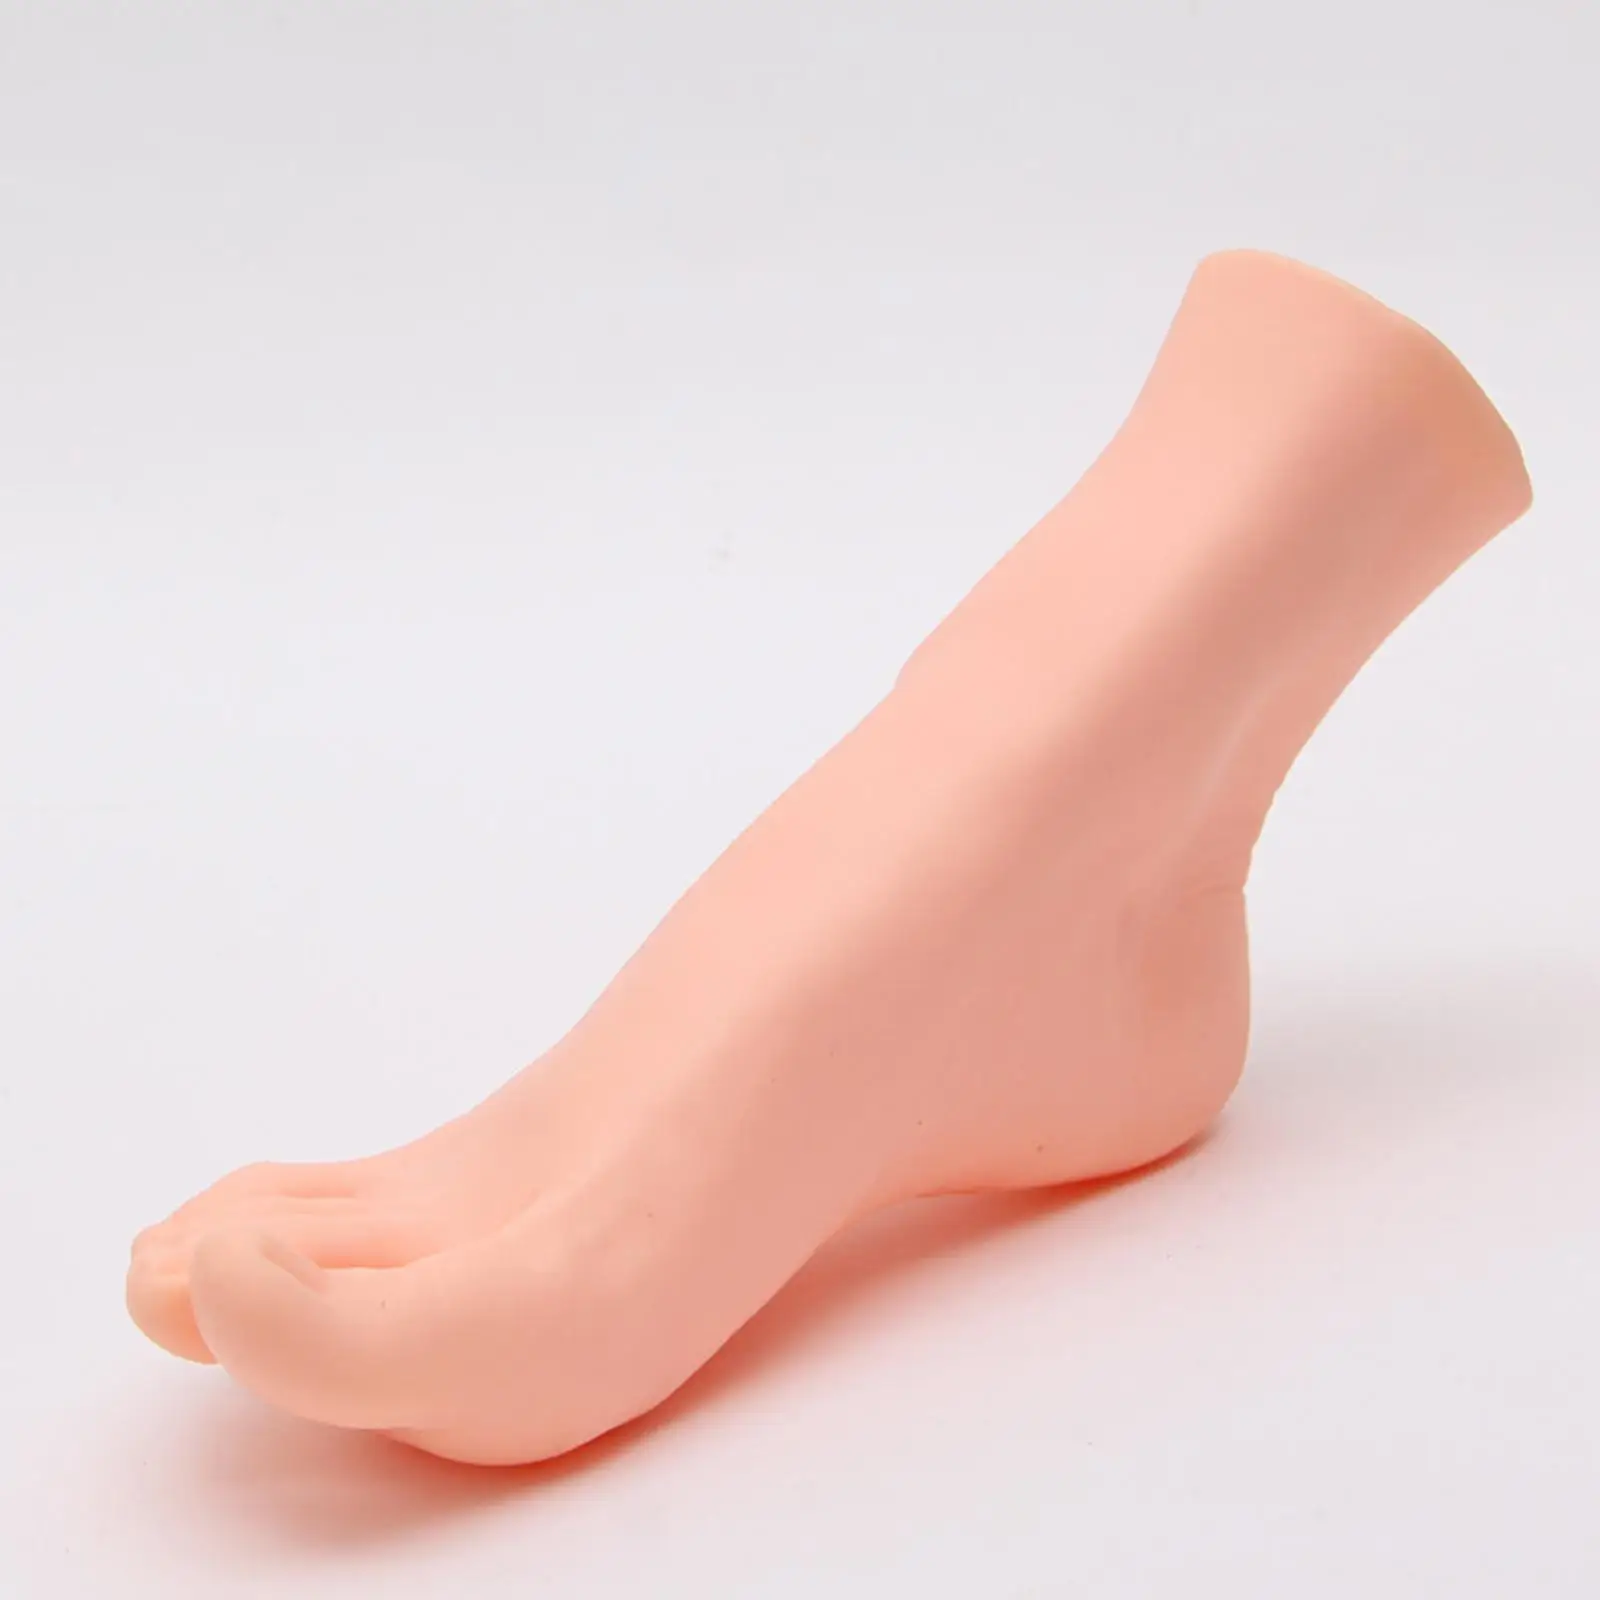 Soft Lifesize Female Mannequin Foot Fake Manicure Movie Props Jewerly Sandal Shoe Sock Display Art Sketch Nail Shoes Display